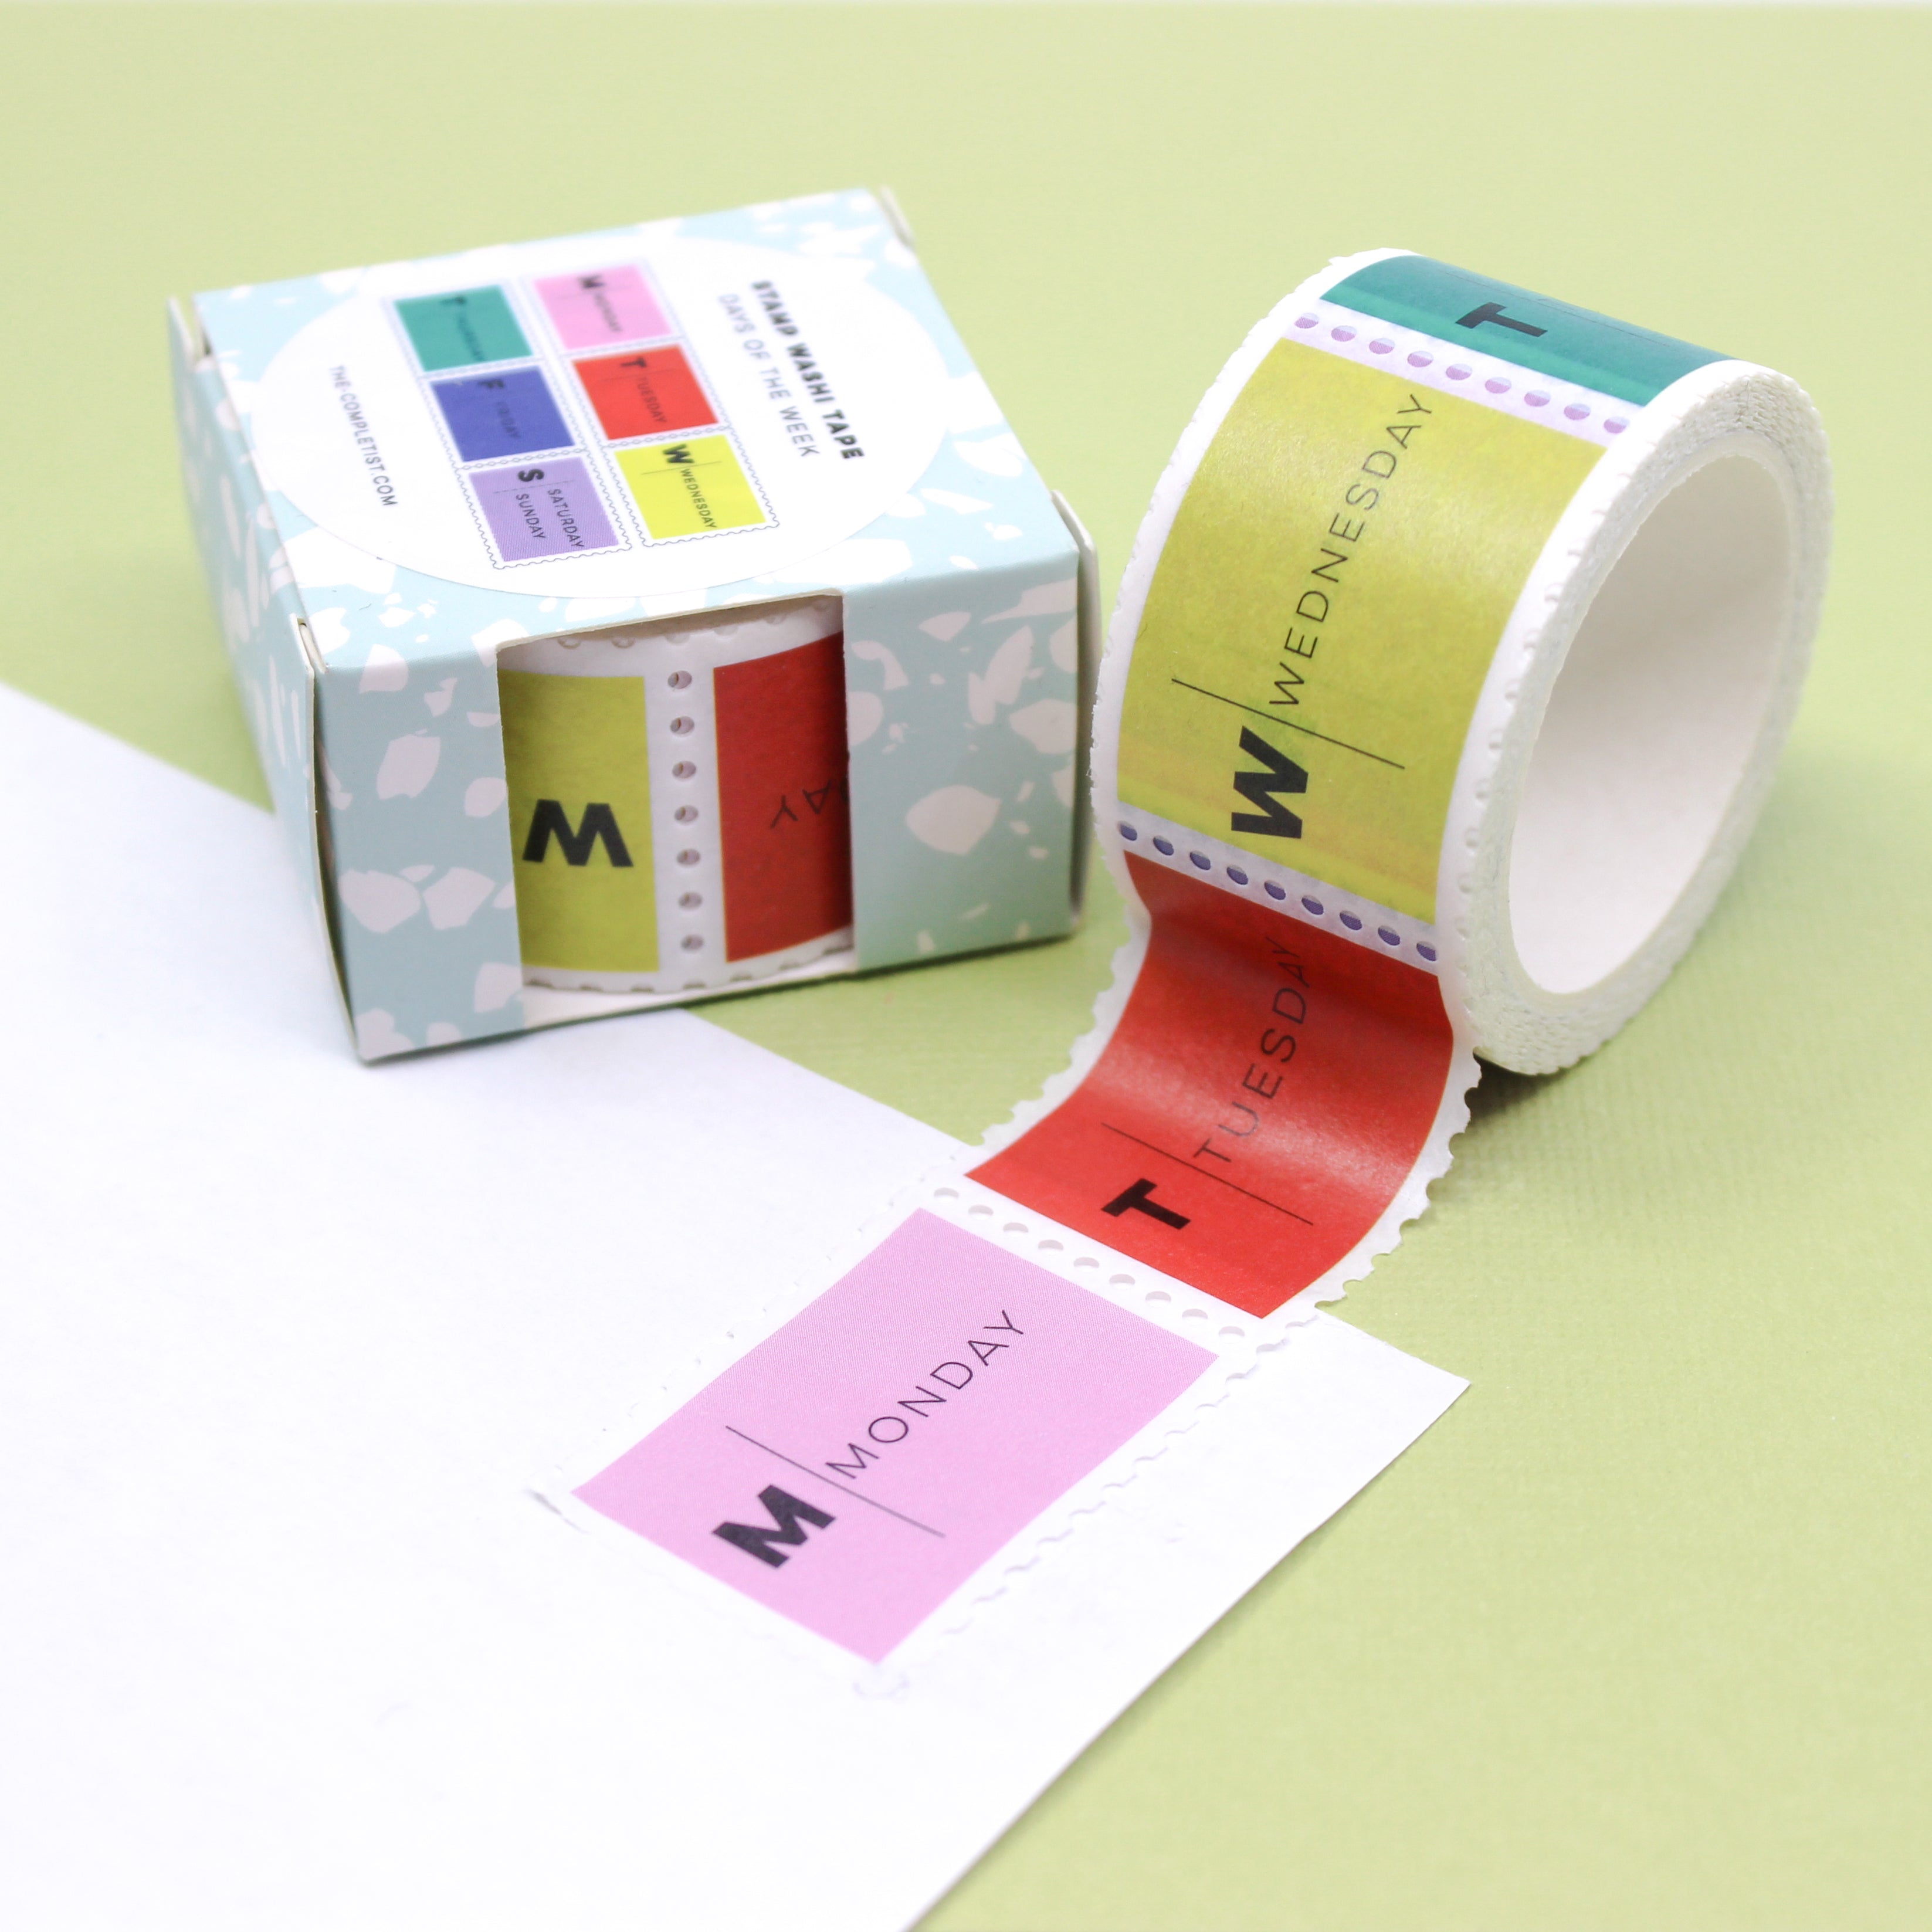 This is a primary color days of the week stamps pattern washi tape from BBB Supplies Craft Shop